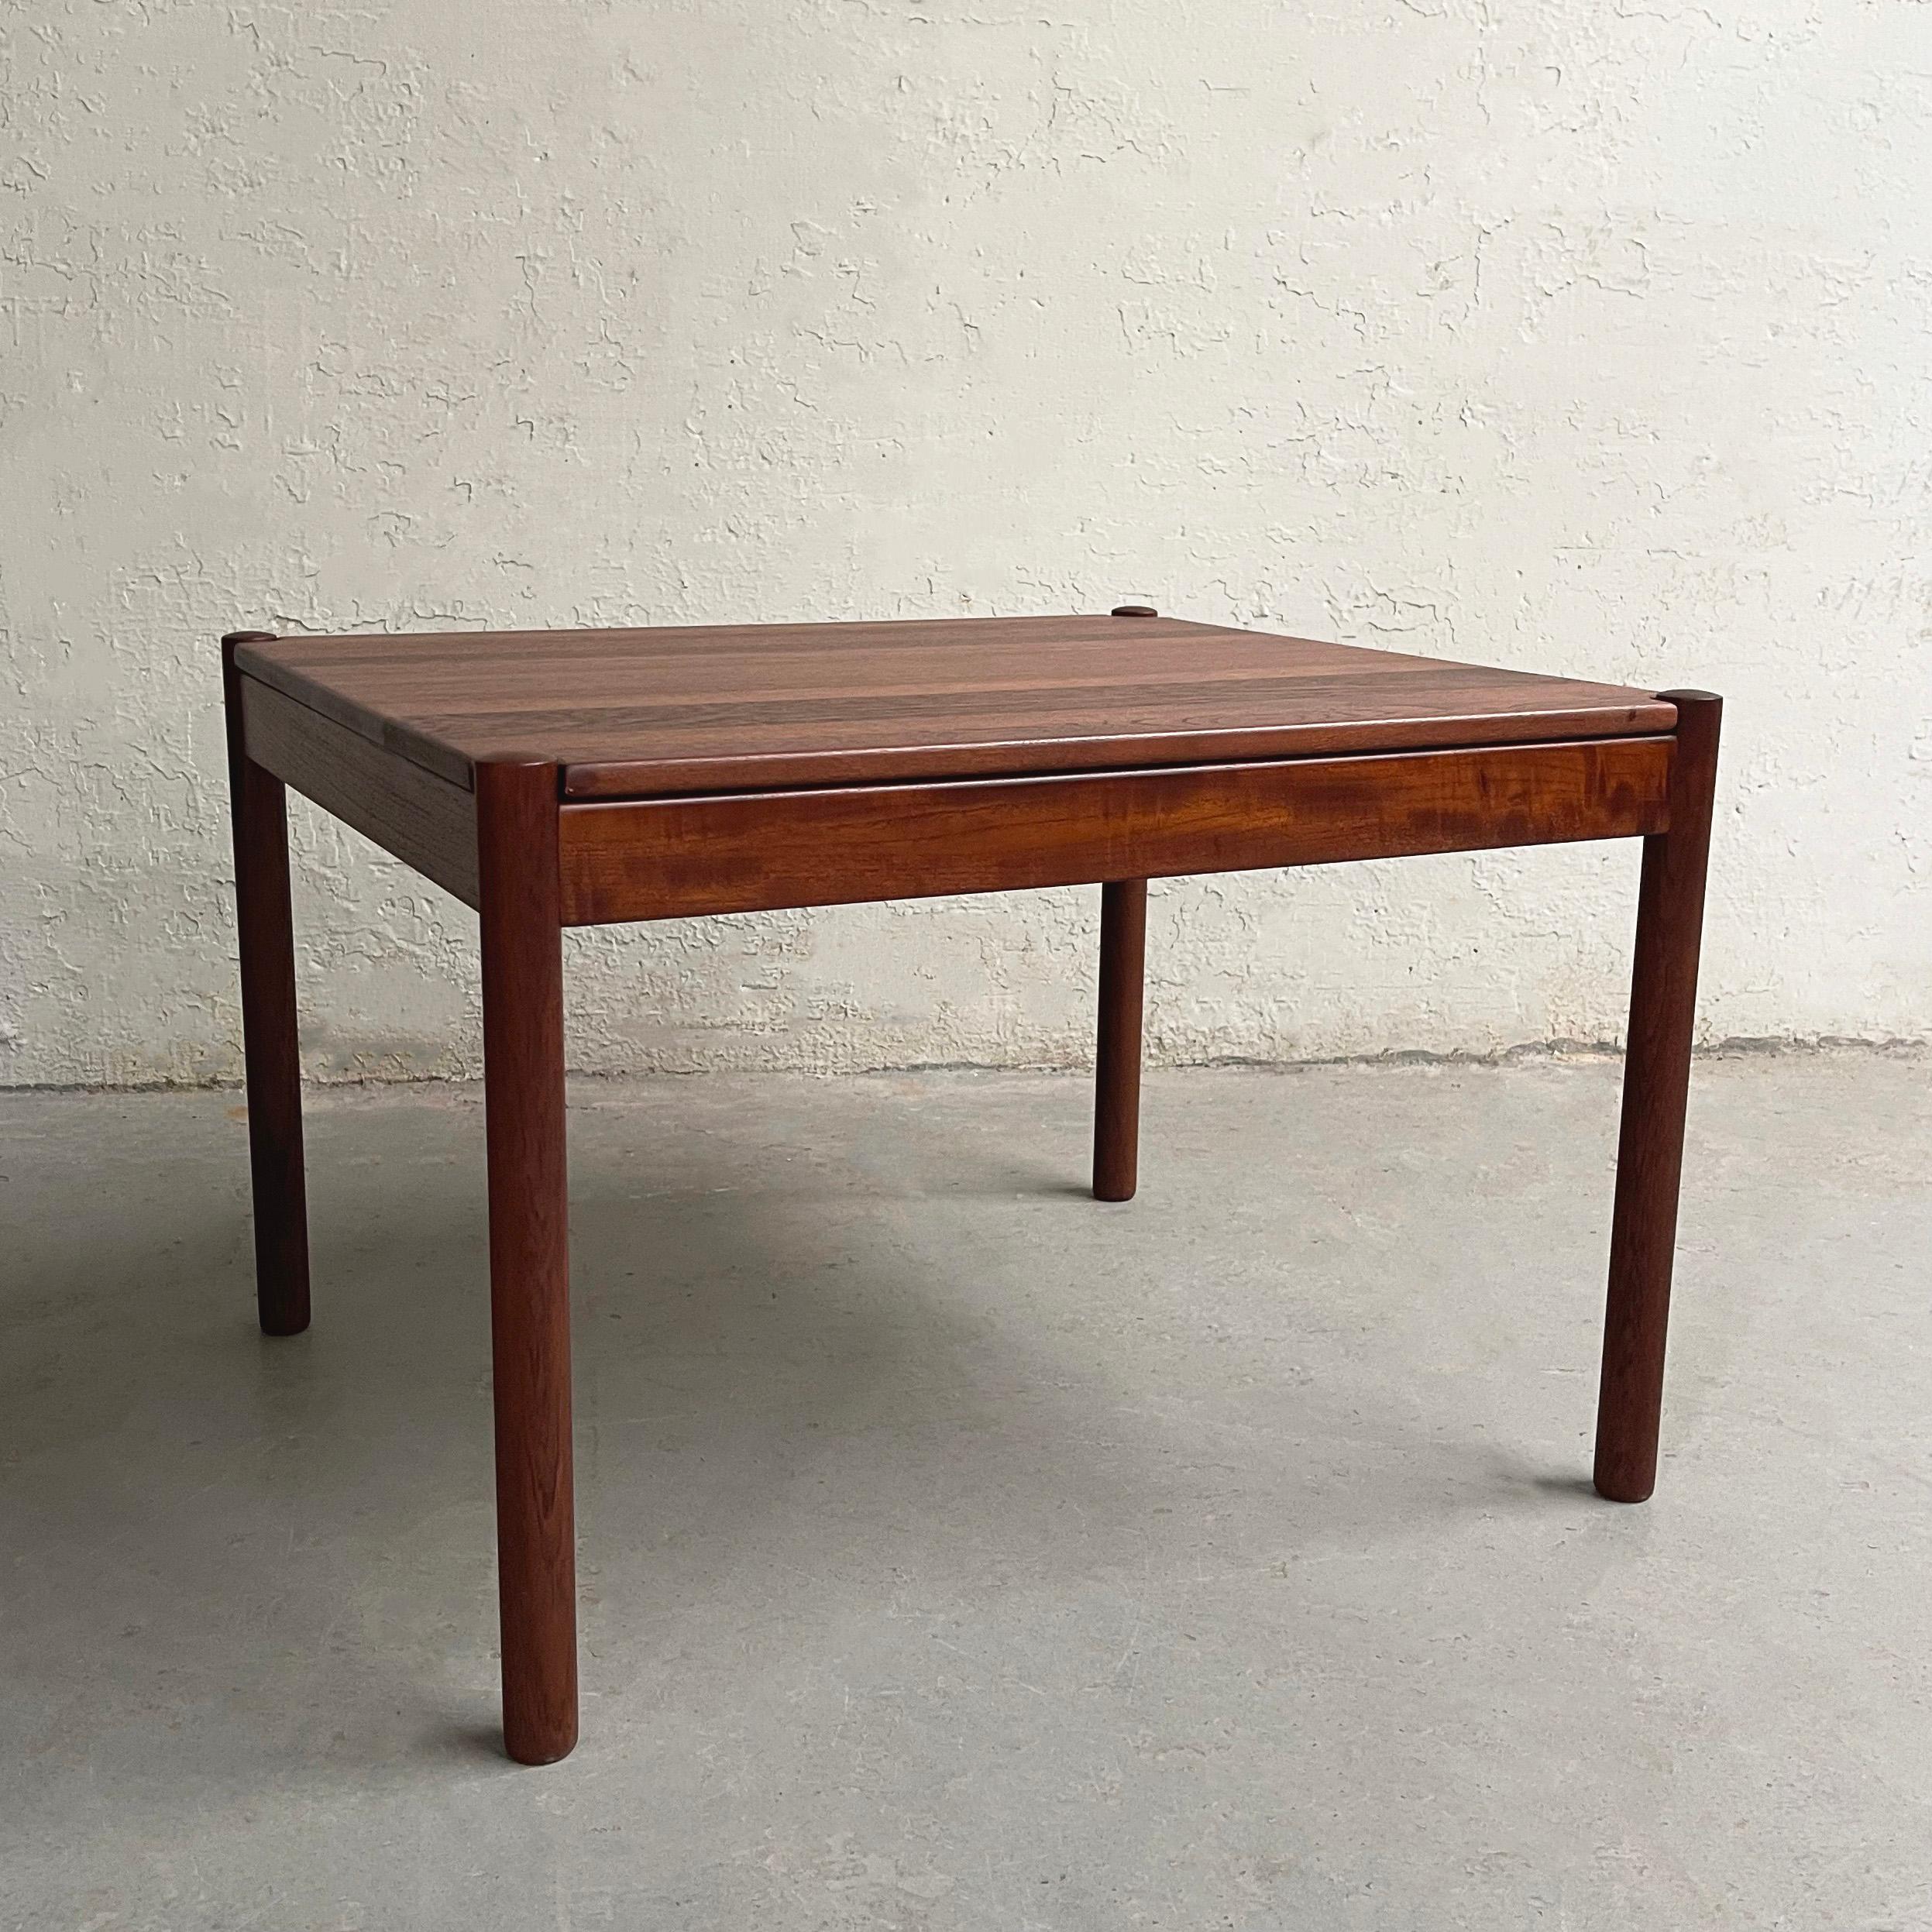 Scandinavian modern, solid teak coffee or side table by Magnus Olsen, Durup Denmark features a removeable top that rests within the base.